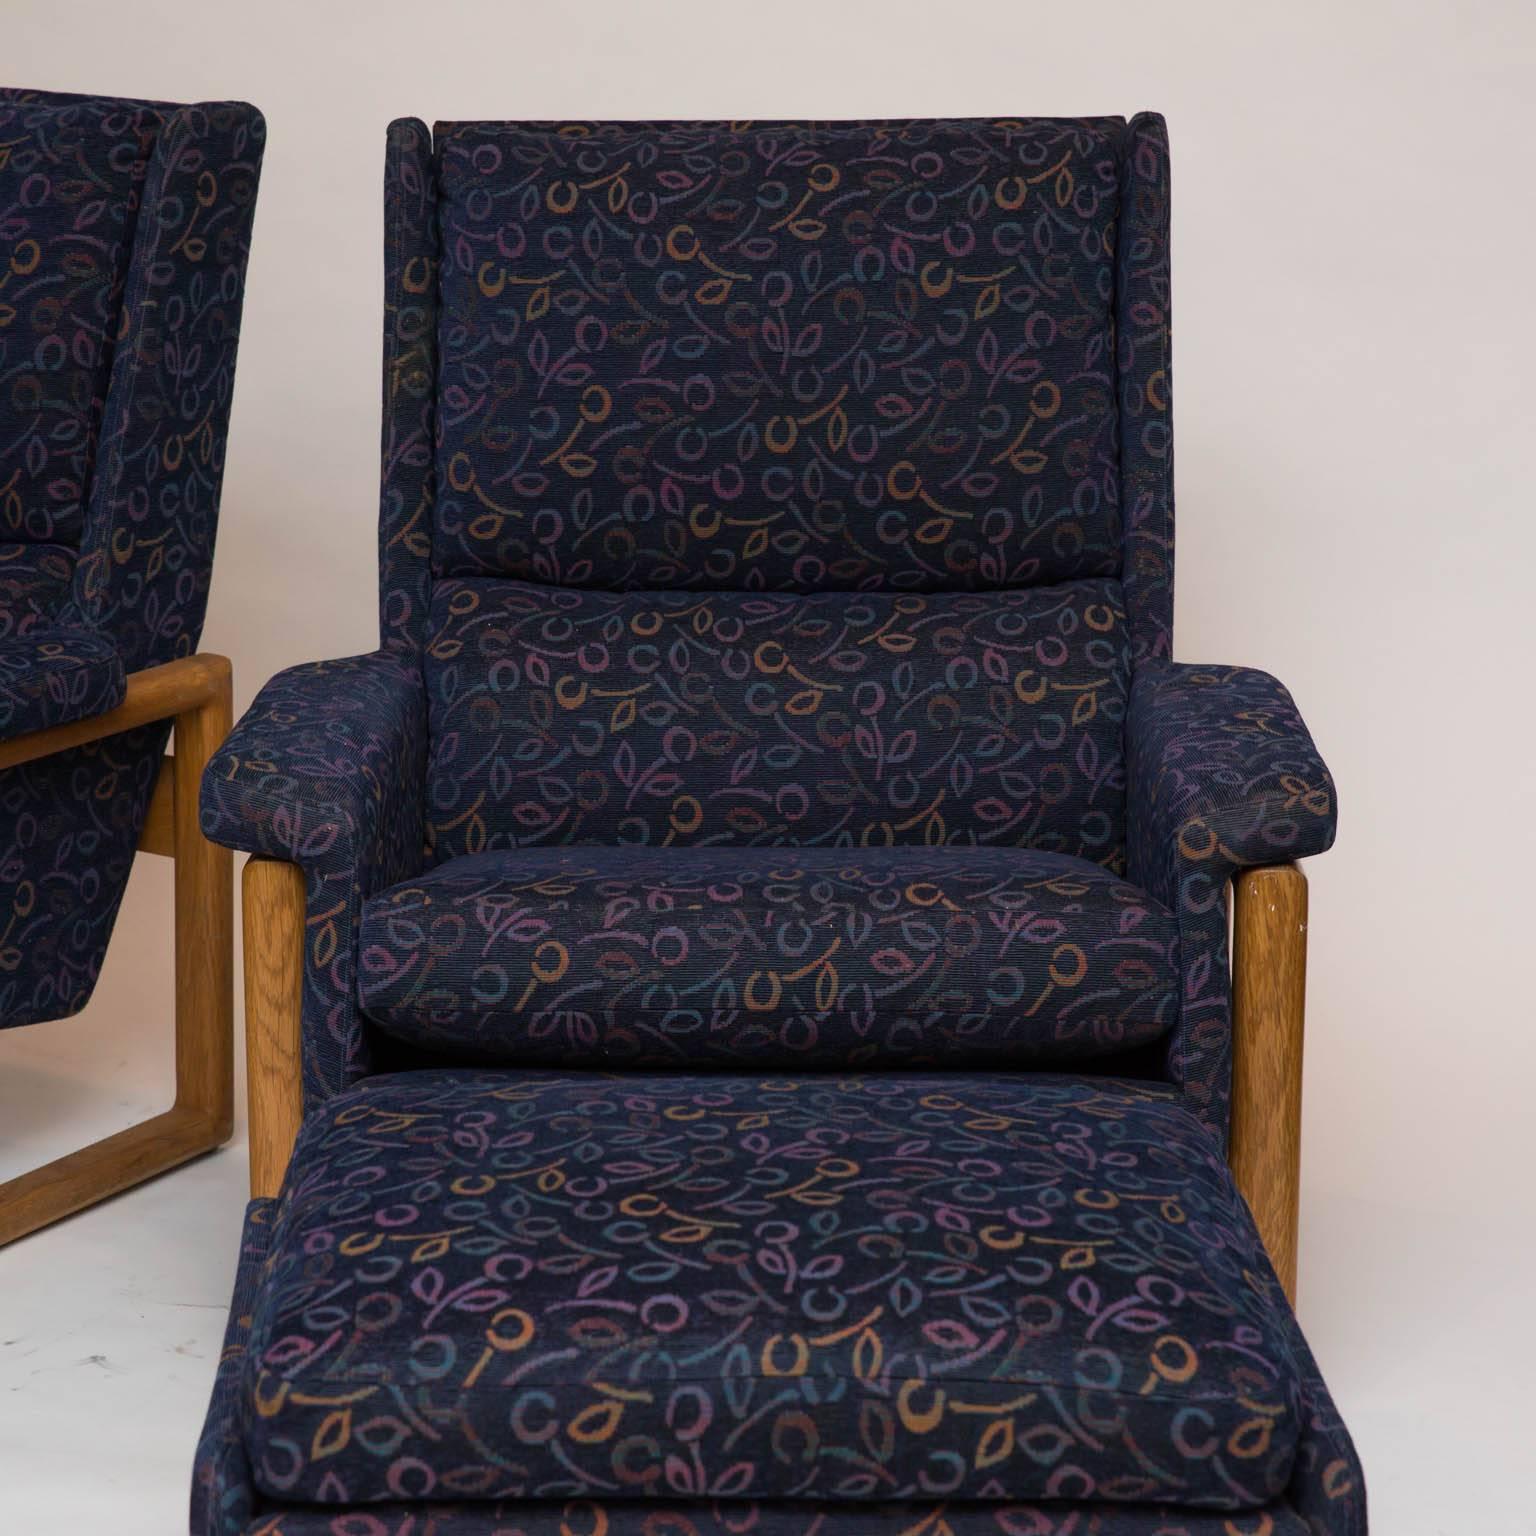 Great lounge chairs from the 1980s with a Danish modern influence. Made of a clear stained oak frame and upholstered in contemporary fabric with a navy blue background. Two are available. Price listed is per item.